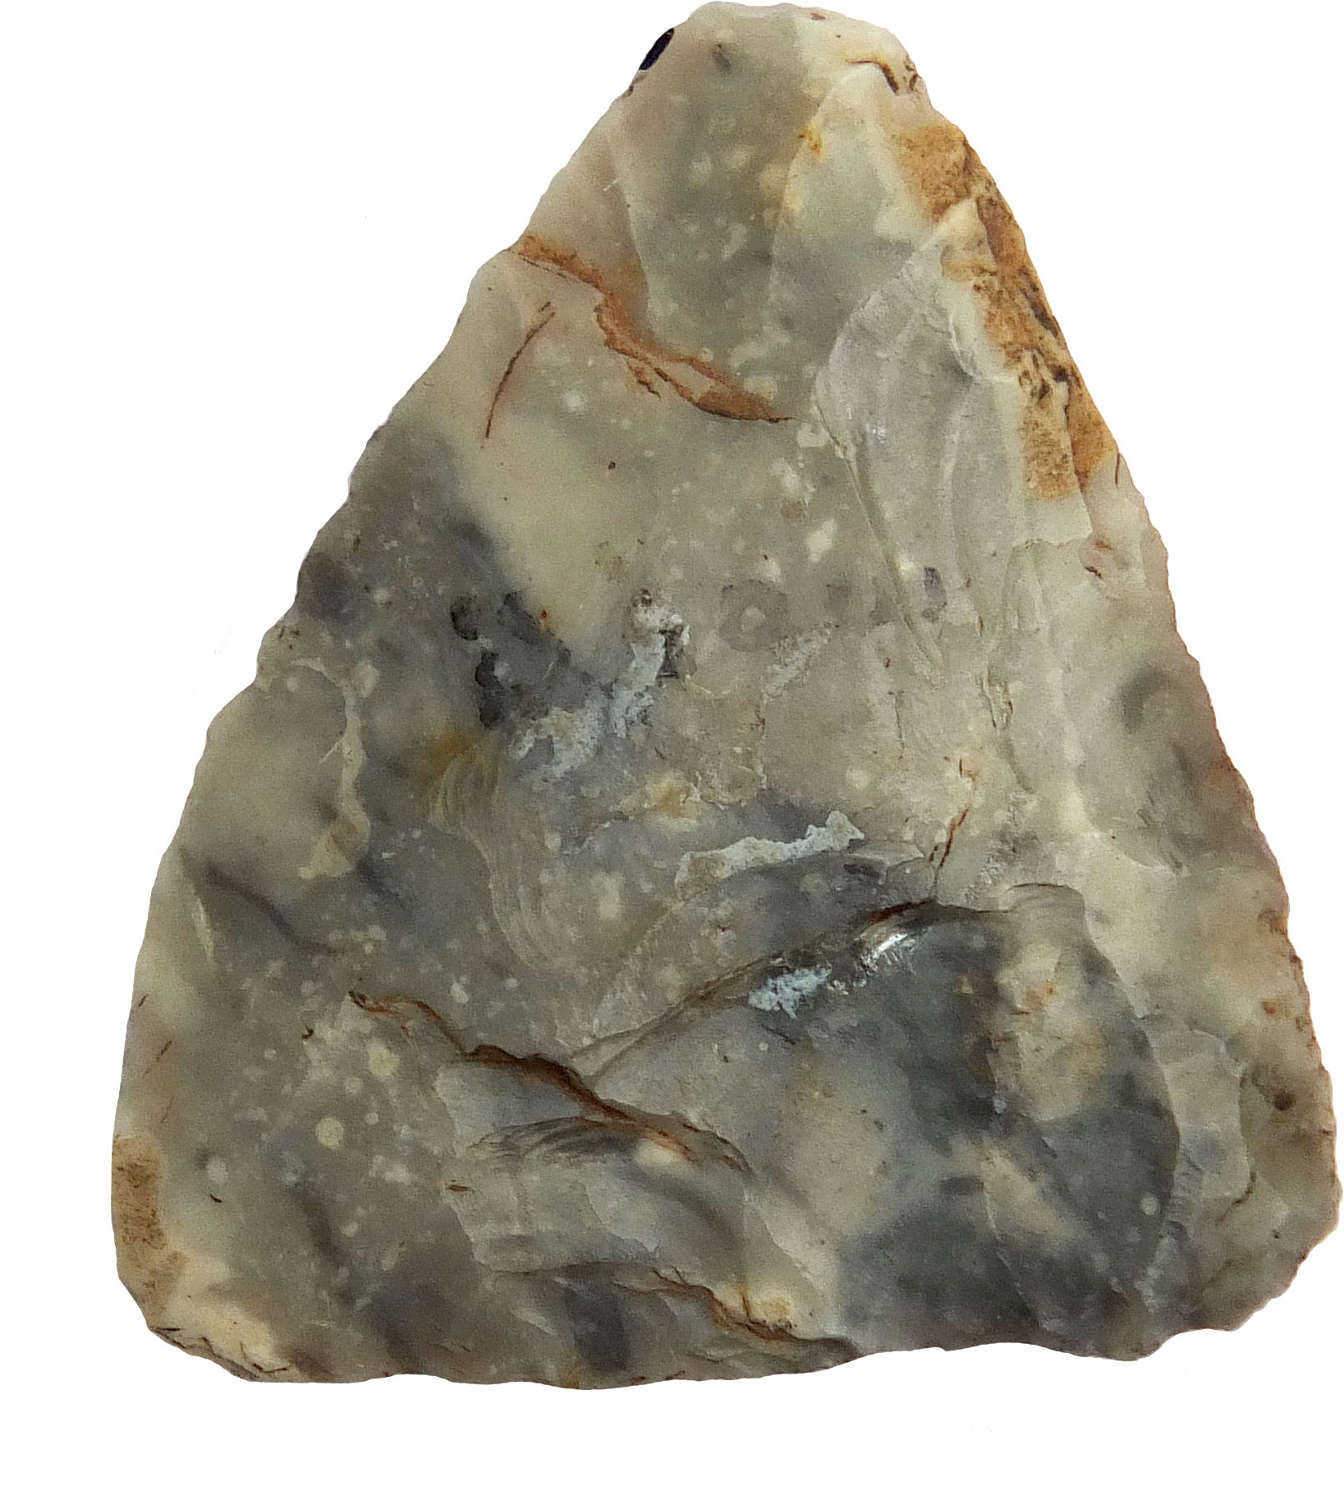 A Neolithic flint arrowhead found at Horsham, West Sussex